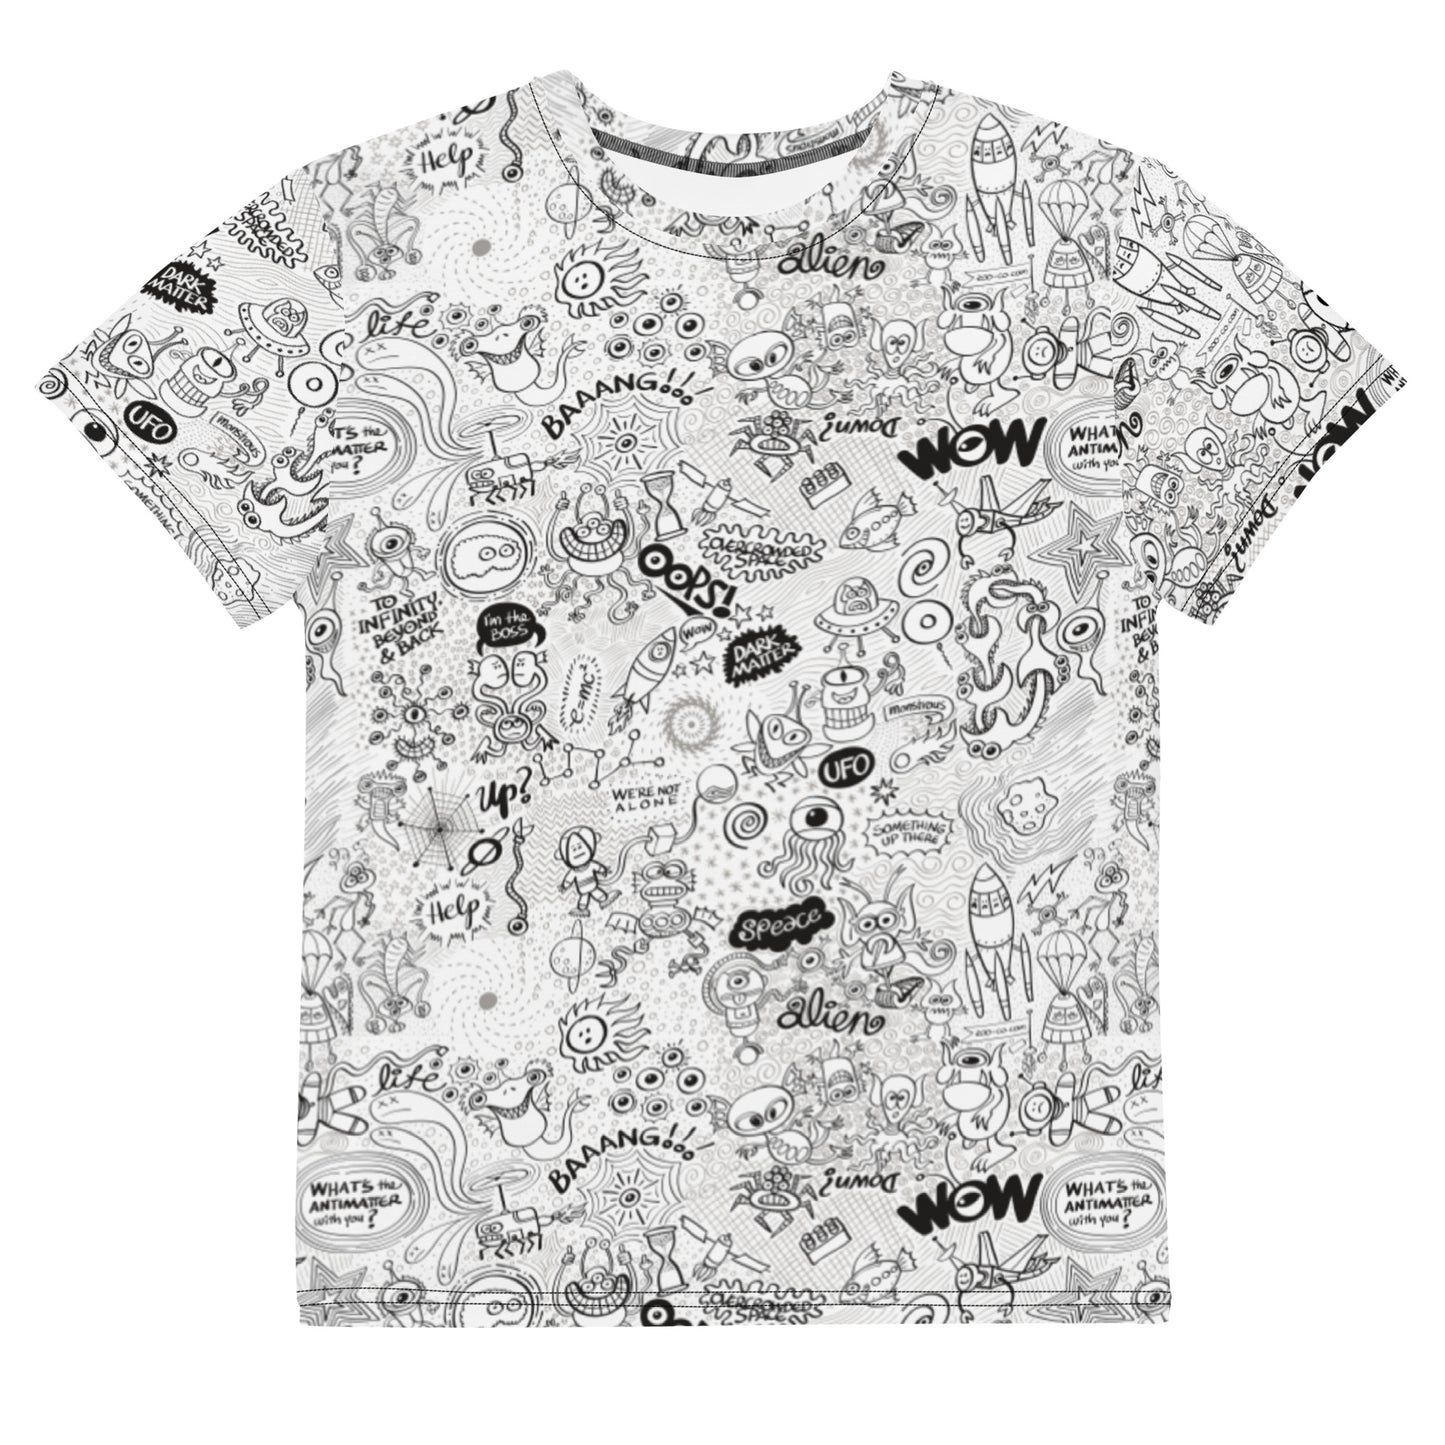 Celebrating the most comprehensive Doodle art of the universe Youth crew neck t-shirt. Front view